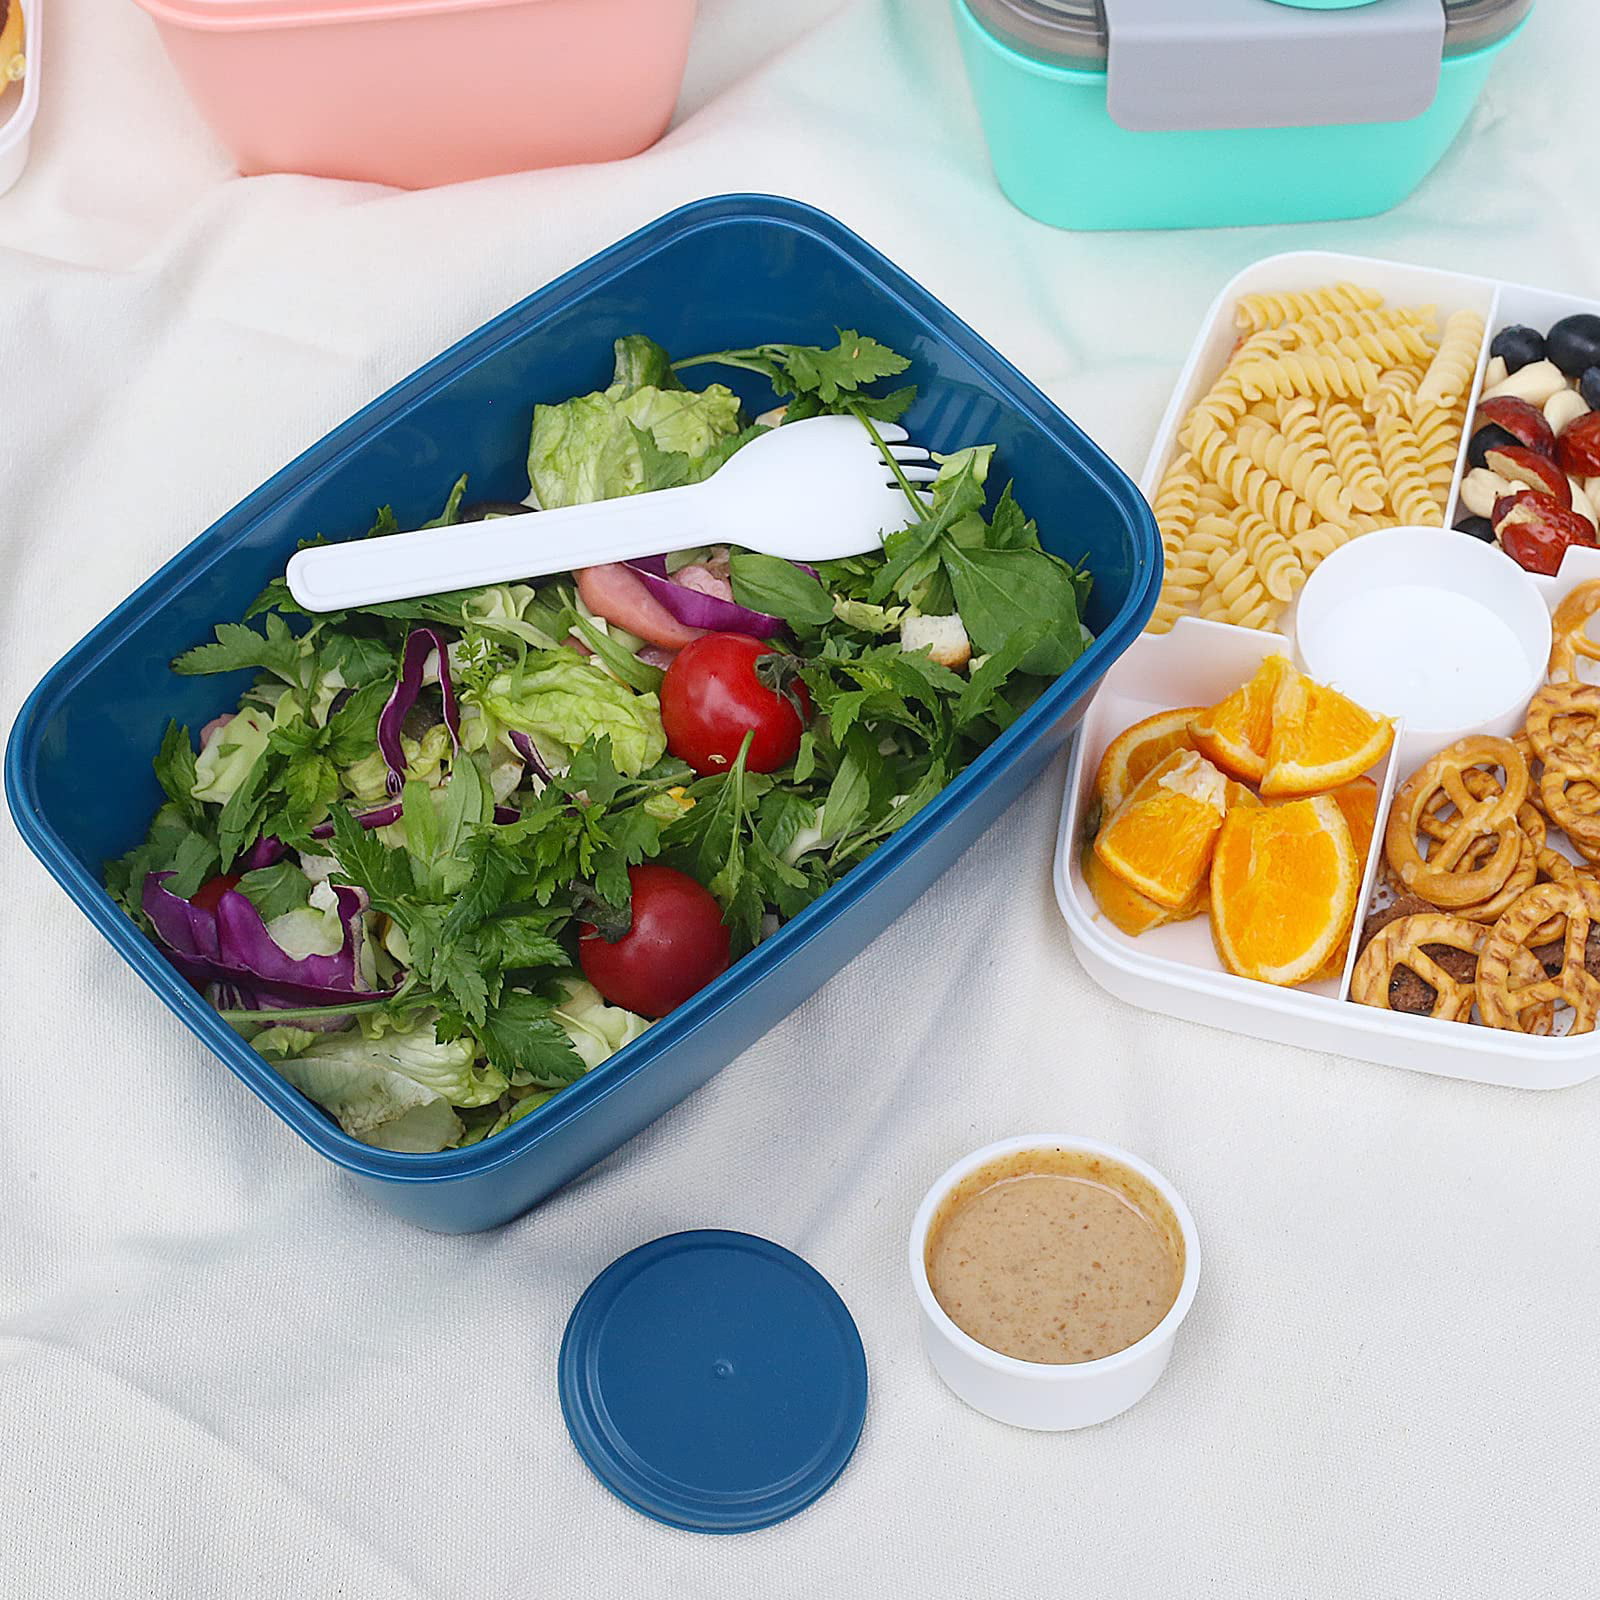 shopwithgreen 52 OZ to Go Salad Container Lunch Container,  BPA-Free, 3-Compartment for Salad Toppings and Snacks, Salad Bowl with Dressing  Container, Built-in Reusable spoon, Microwave Safe: Salad Plates